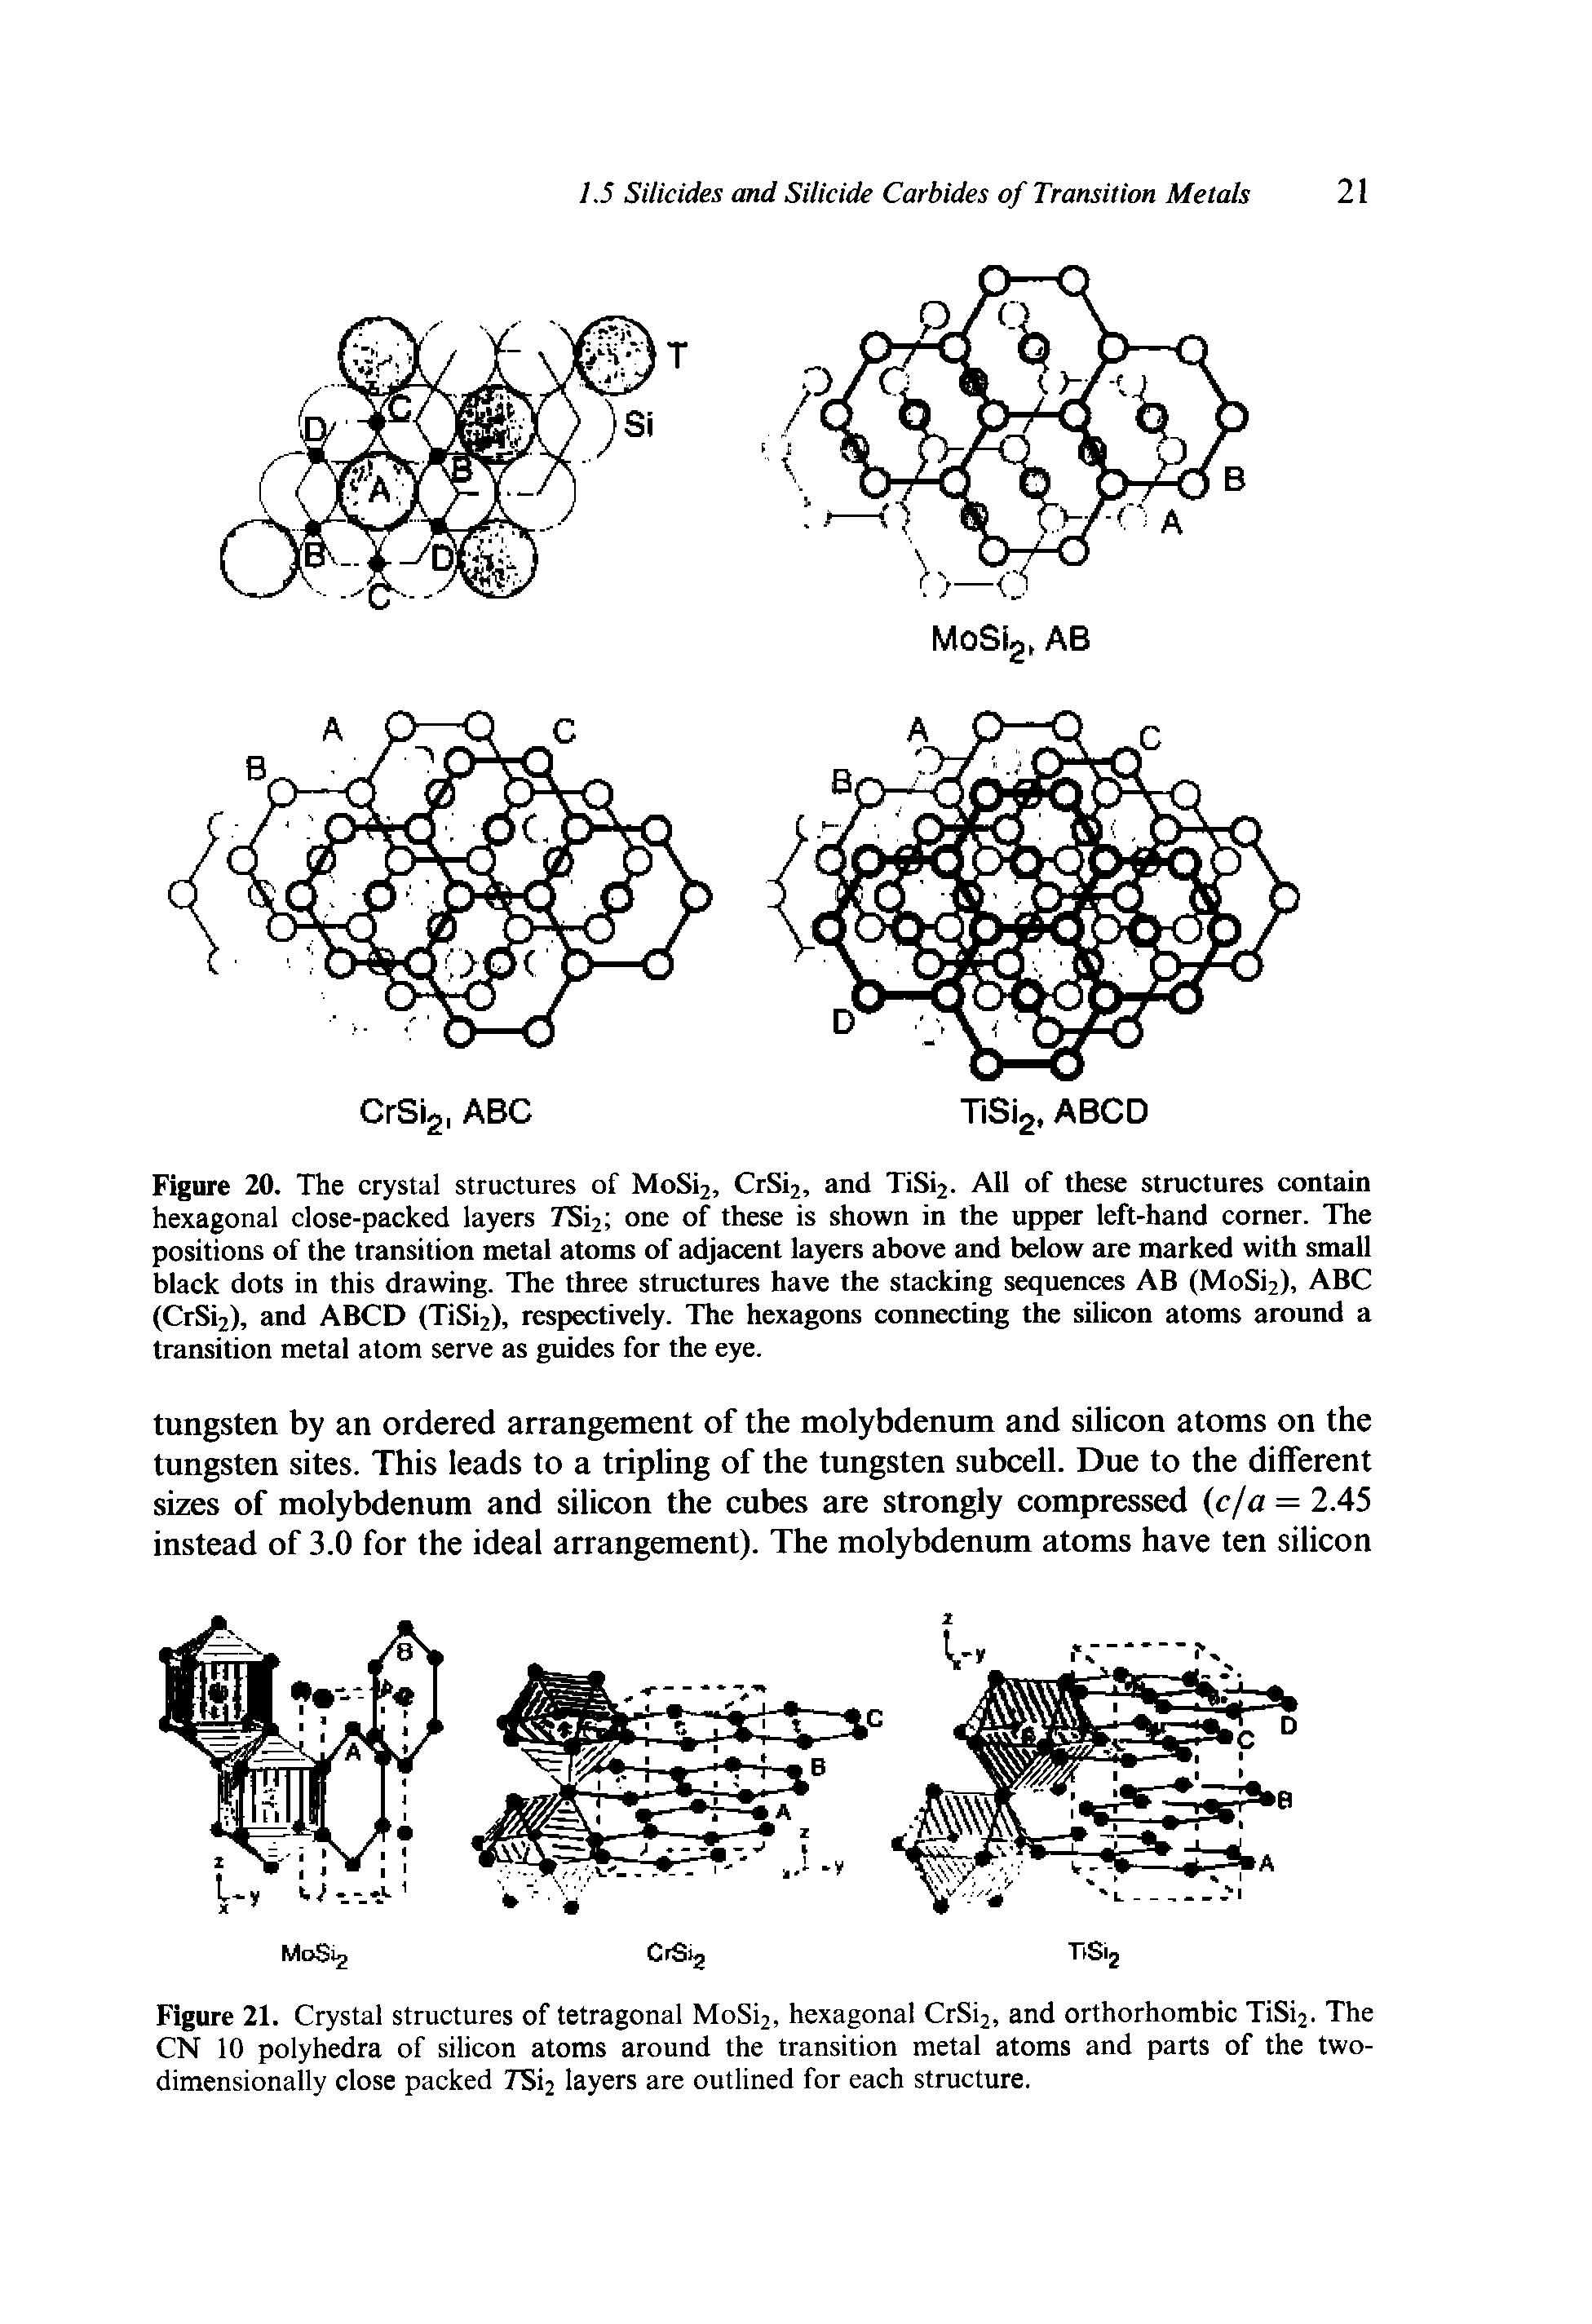 Figure 21. Crystal structures of tetragonal MoSi2, hexagonal CrSi2, and orthorhombic TiSi2. The CN 10 polyhedra of silicon atoms around the transition metal atoms and parts of the two-dimensionally close packed TSi2 layers are outlined for each structure.